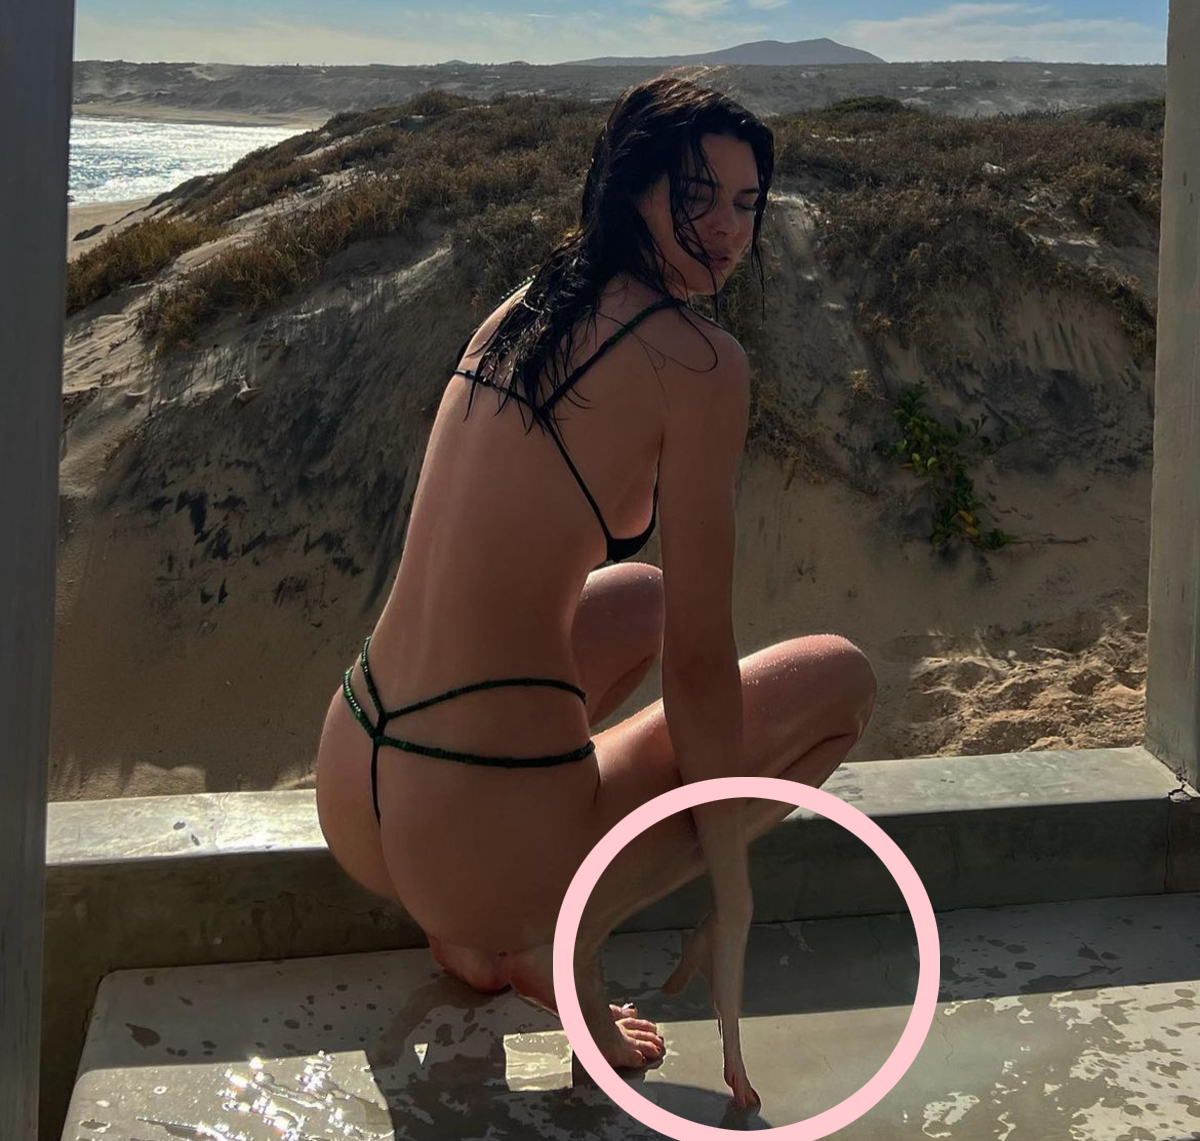 Fans Call Out Kendall Jenner For Photoshop Fail In New Bikini Pictures!